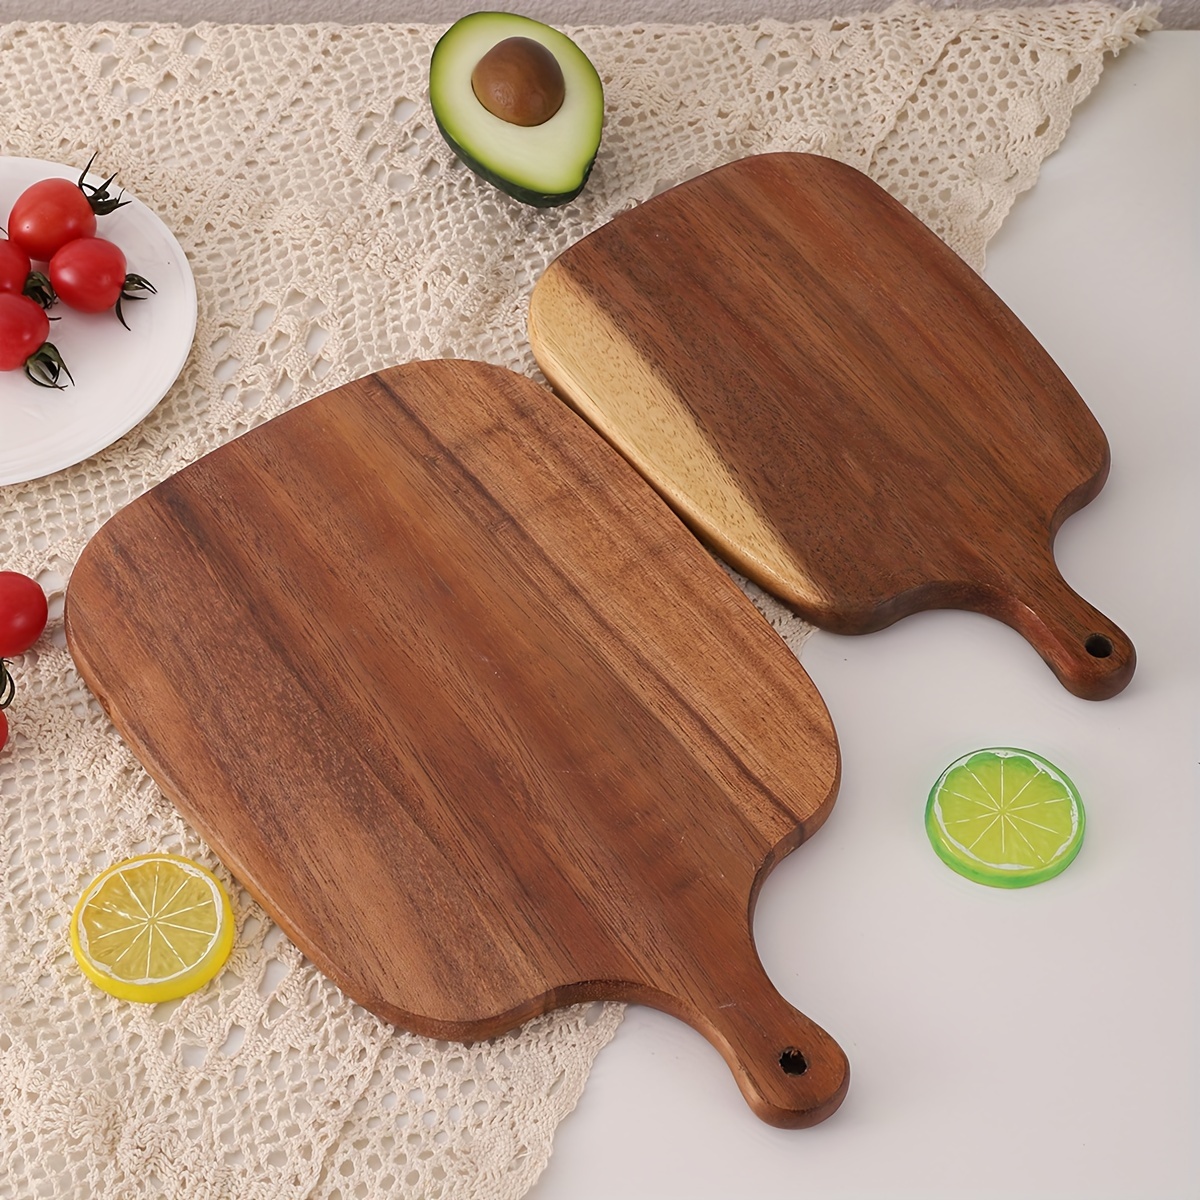  24 Pieces Mini Wood Cutting Board with Handle Wooden Chopping  Board Paddle Unfinished Mini Cheese Board Small Serving board Cooking  Butcher Block for Crafts Vegetable Kitchen Decor (Large): Home & Kitchen